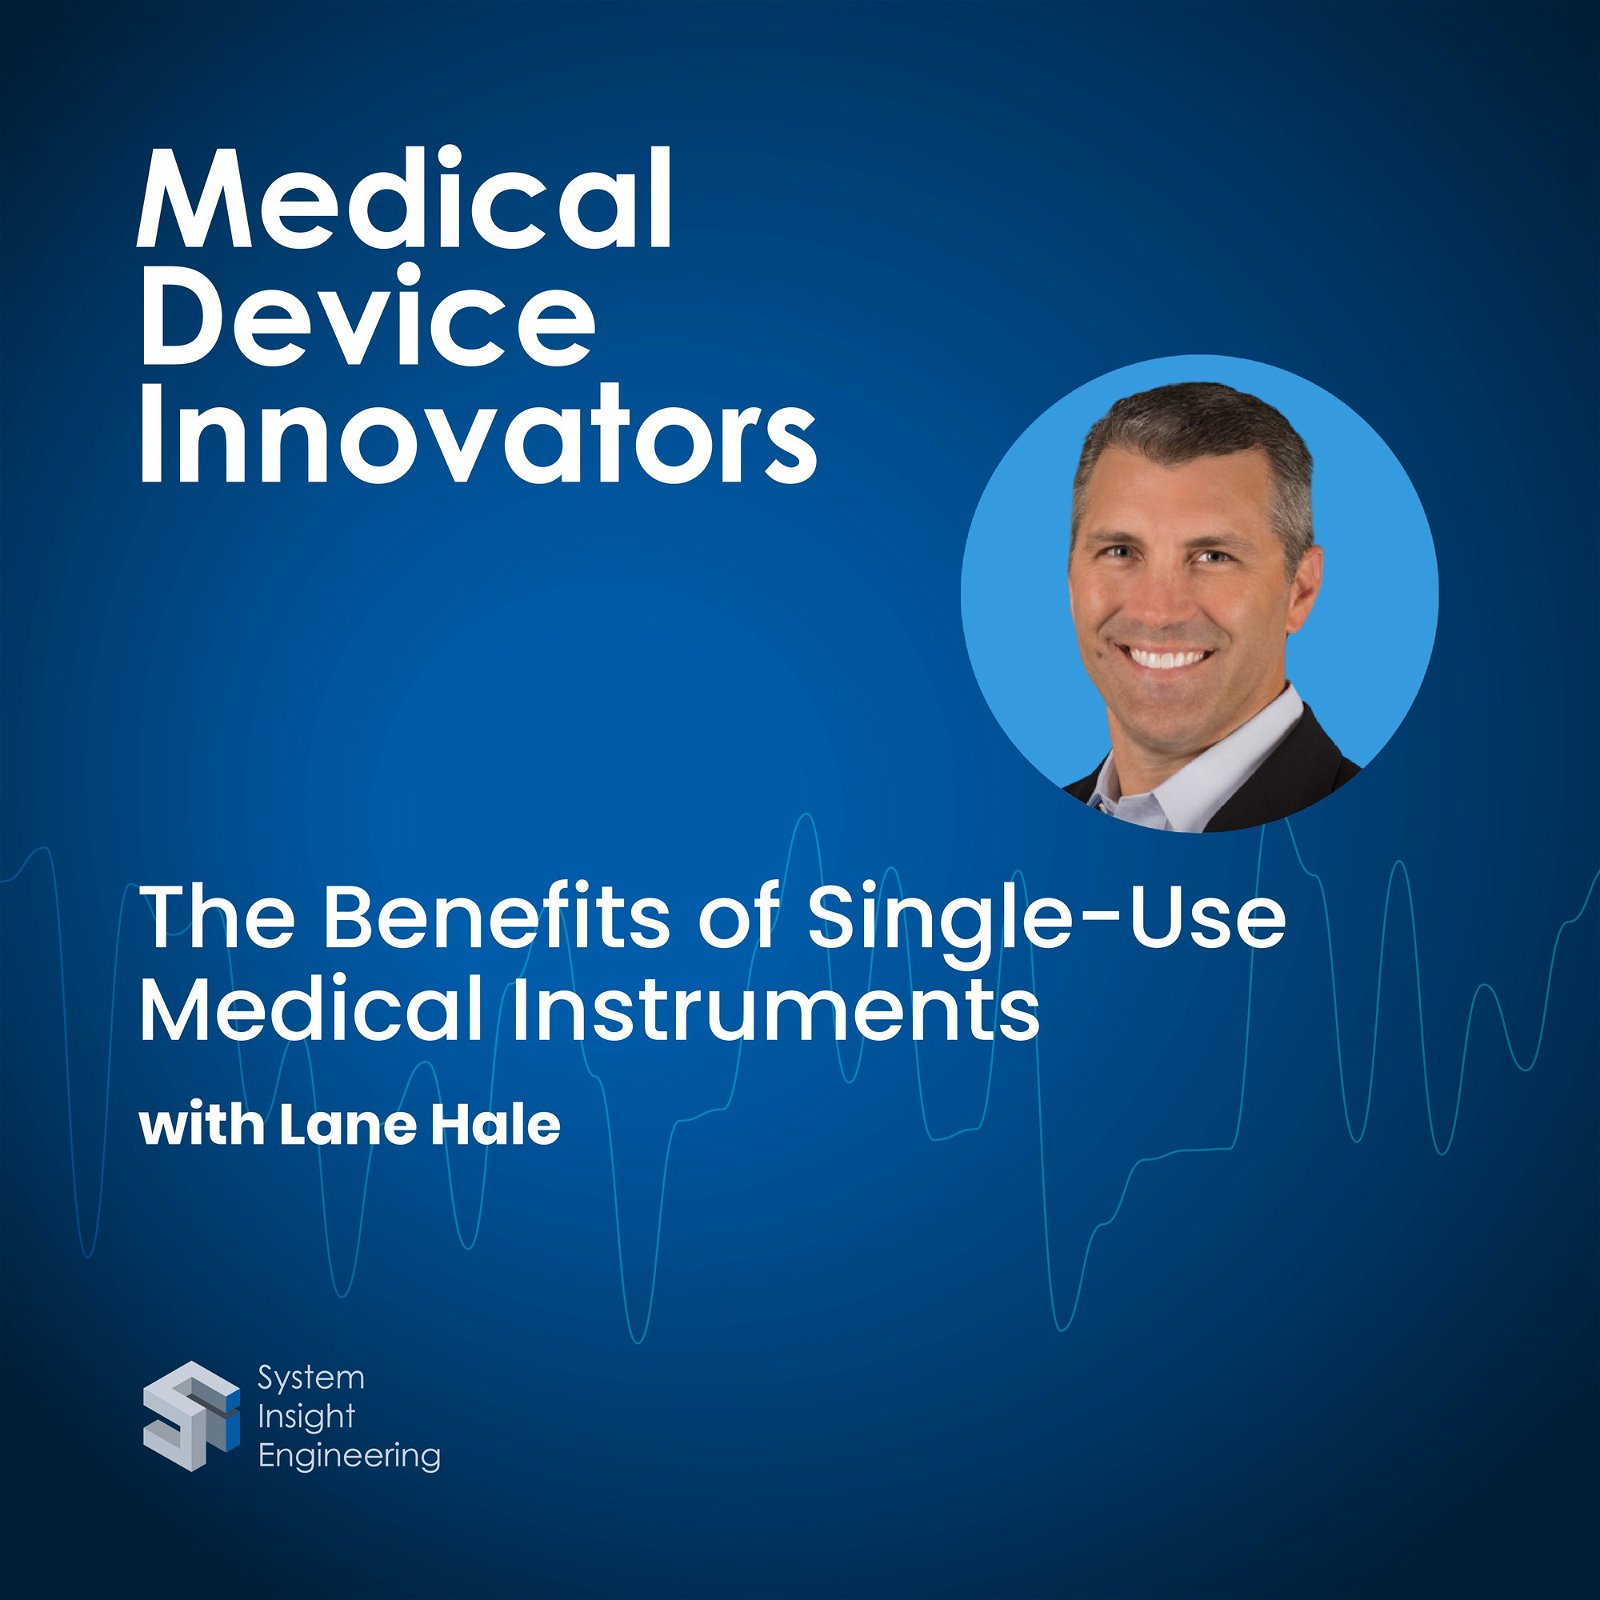 The Benefits of Single-Use Medical Instruments with Lane Hale